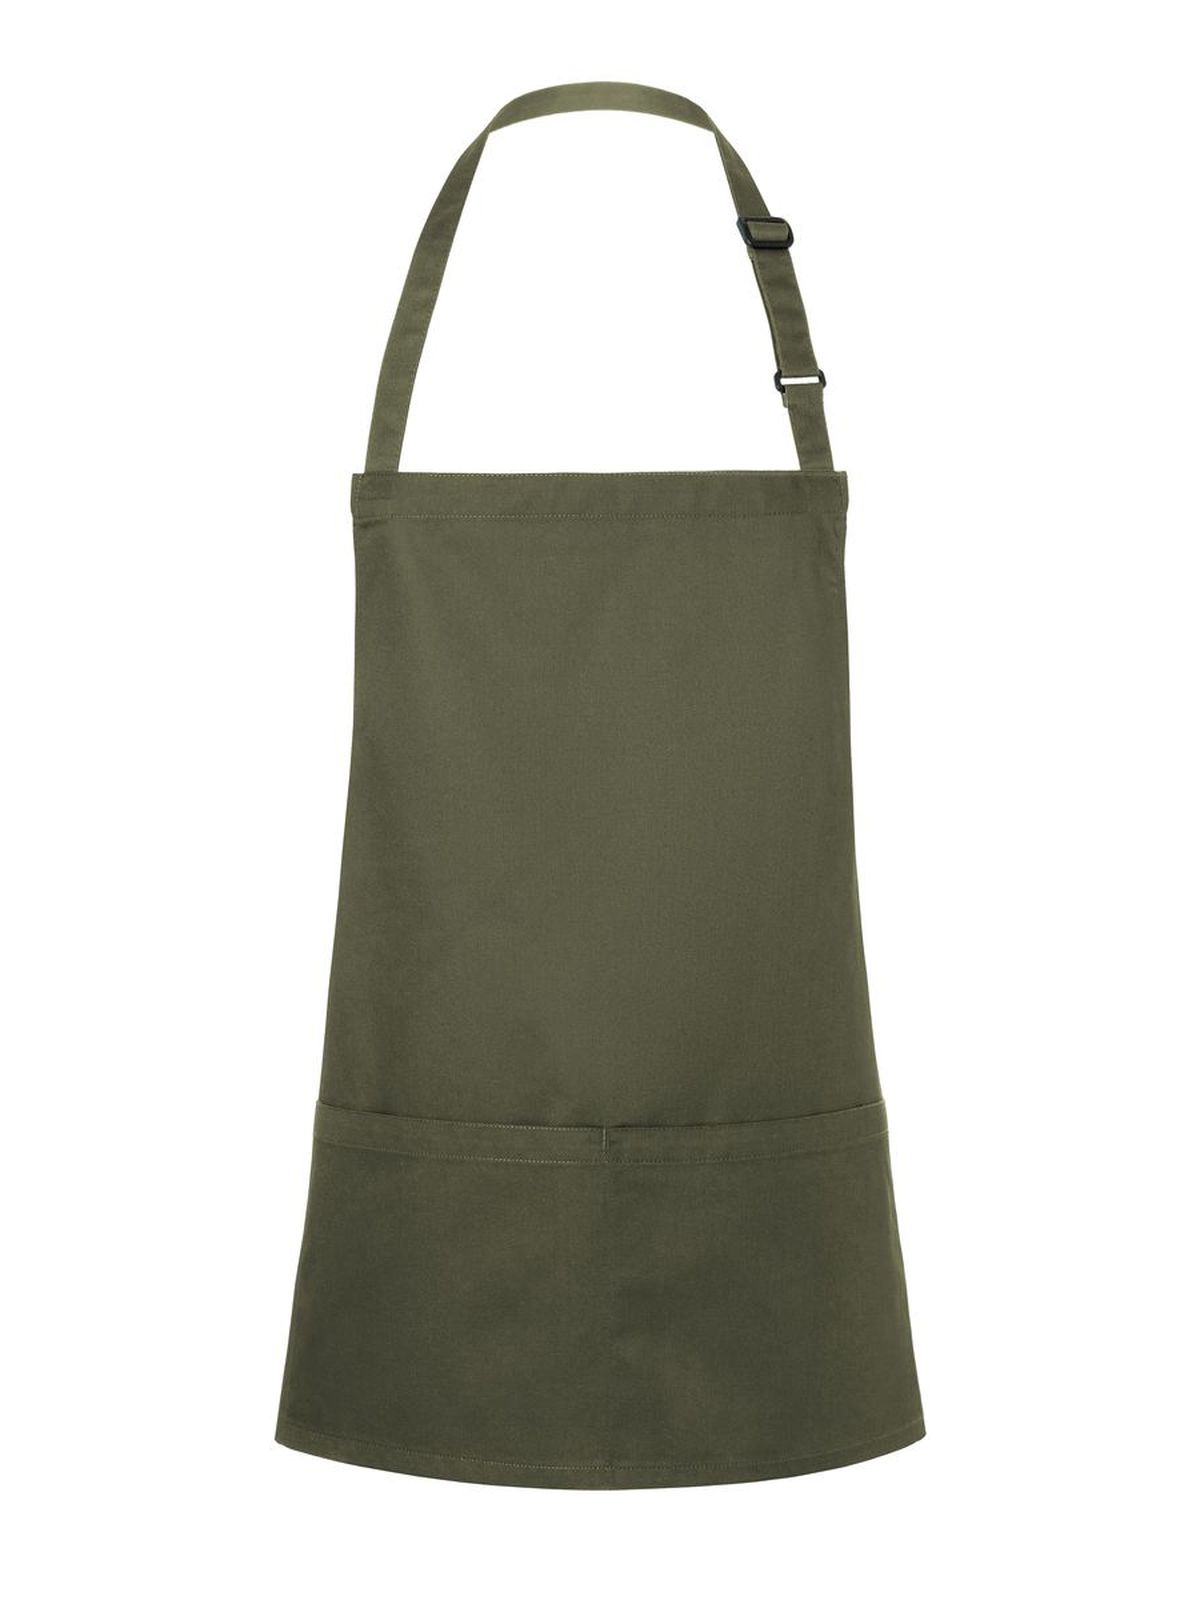 short-bib-apron-basic-with-buckle-and-pocket-0-moss-green.webp